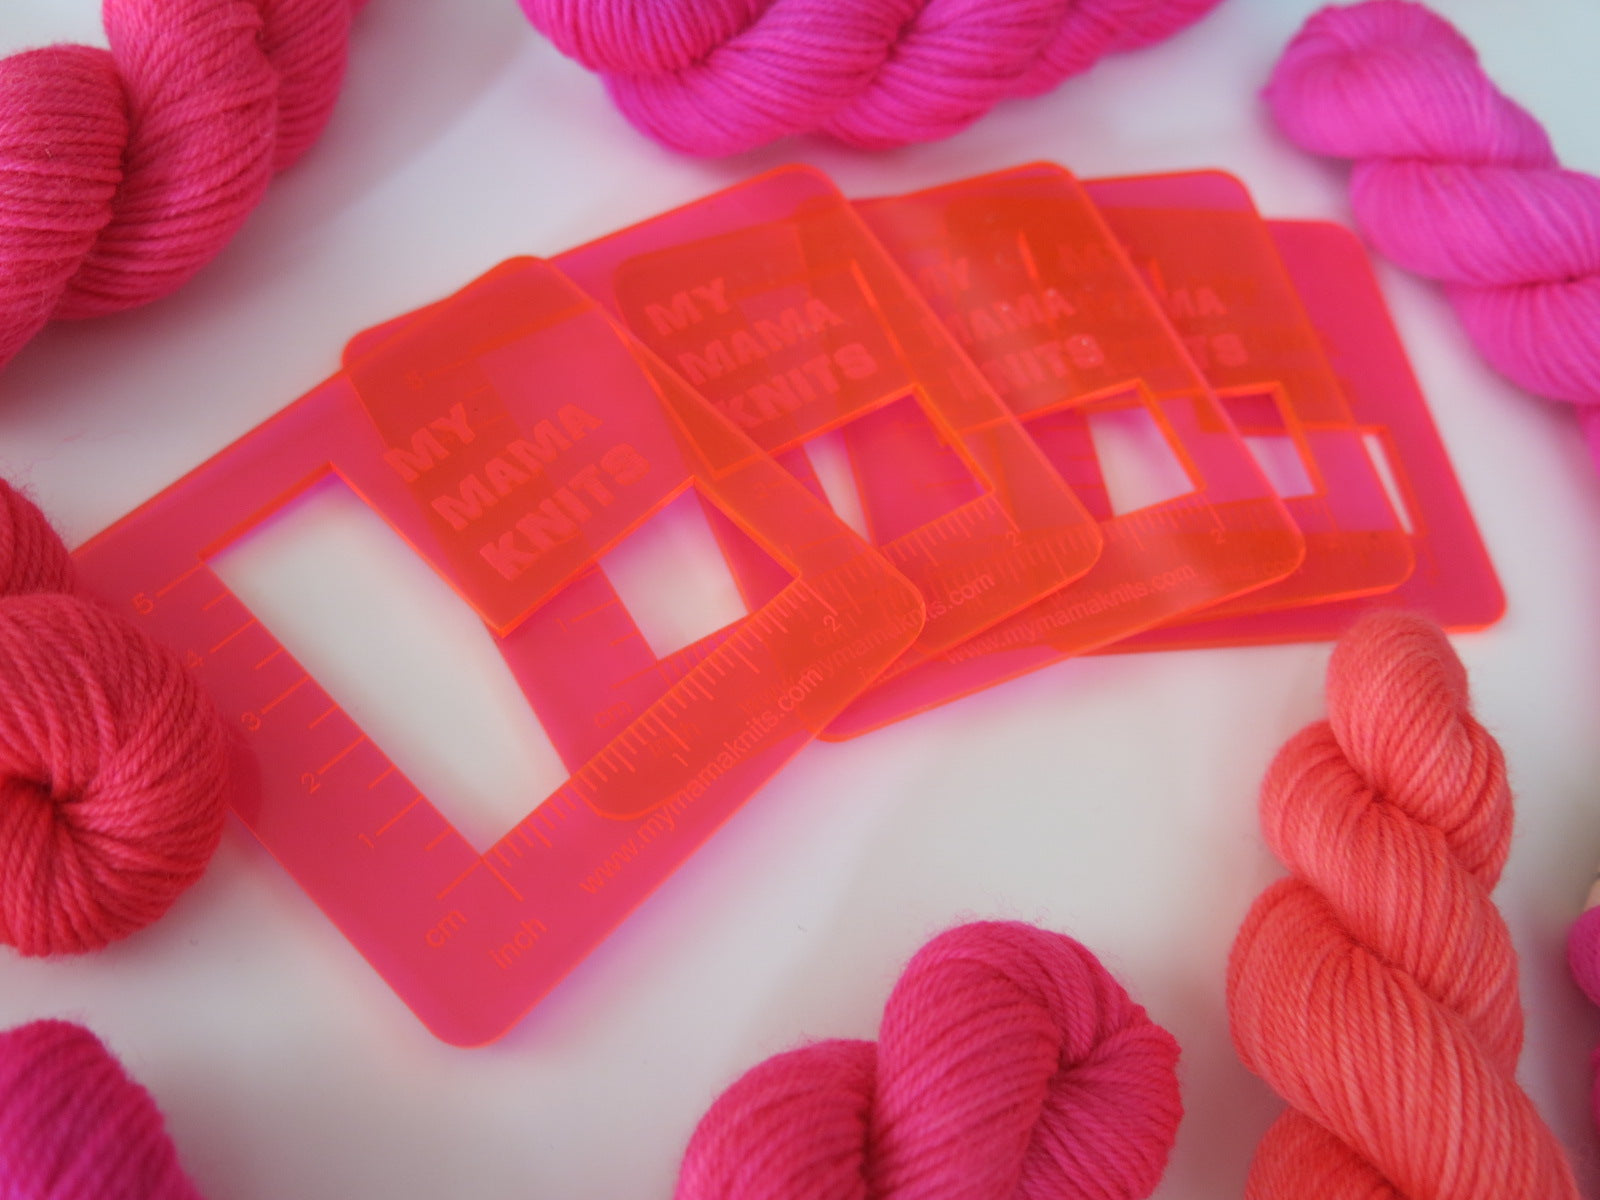 katrinkles acrylic swatch rulers in neon pink orange for knitting and crochet